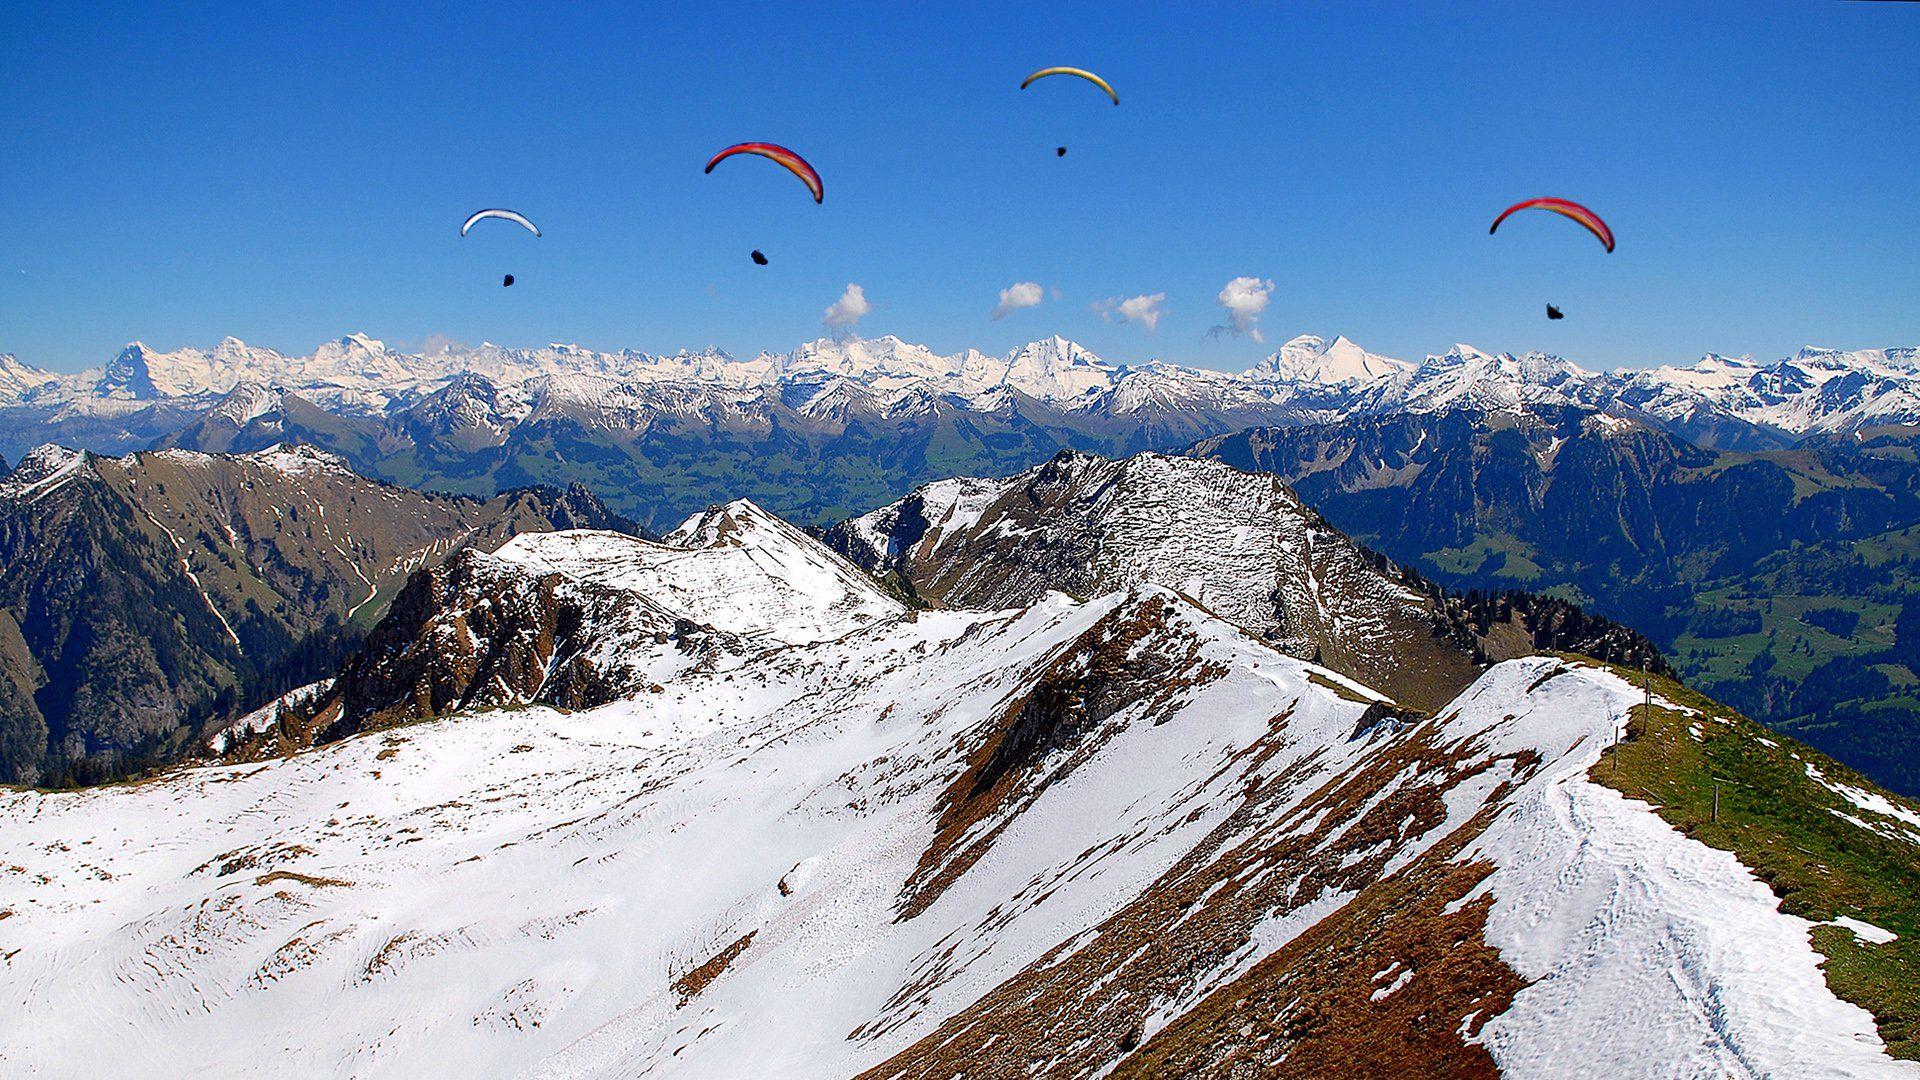 Paragliding Full HD Wallpaper and Backgroundx1080